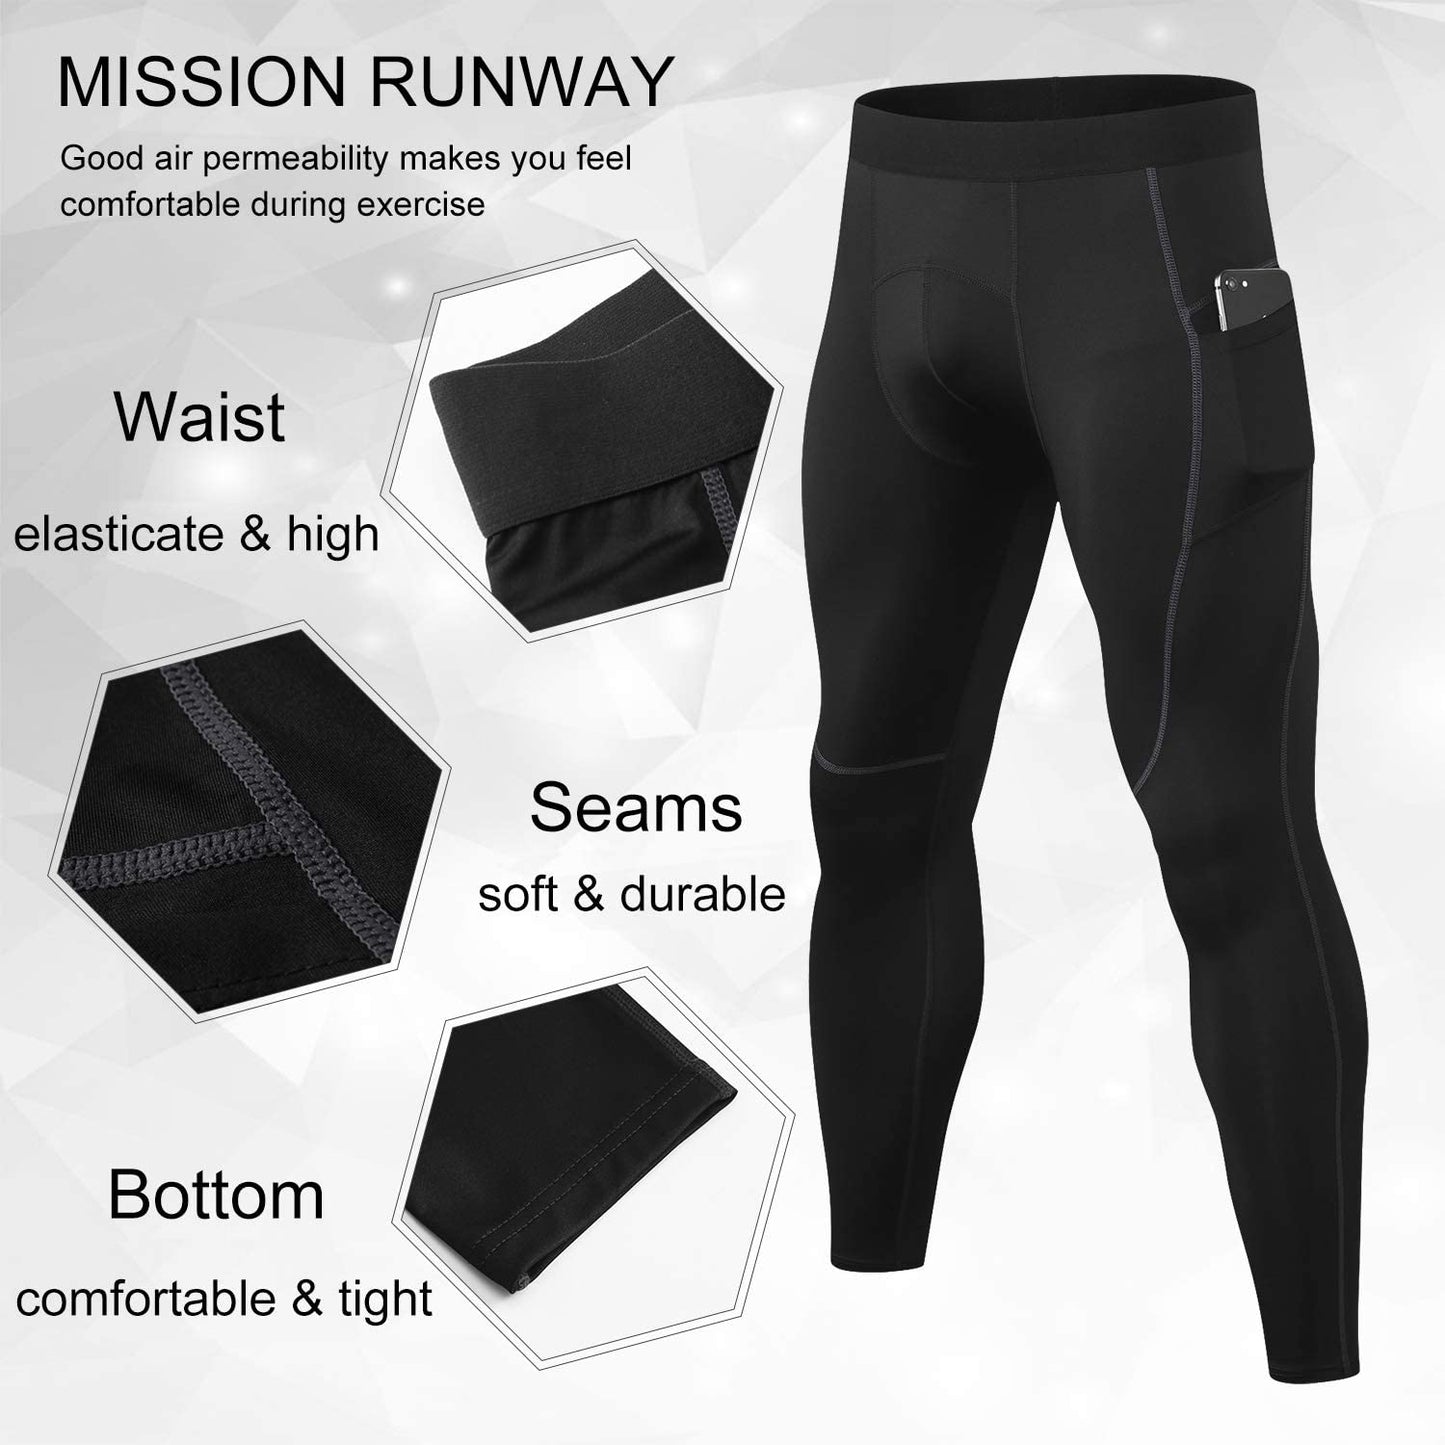 2 Pack Men Compression Pants Running Tights Male Workout Leggings Athletic Cool Dry Yoga Gym Clothes LANBAOSI